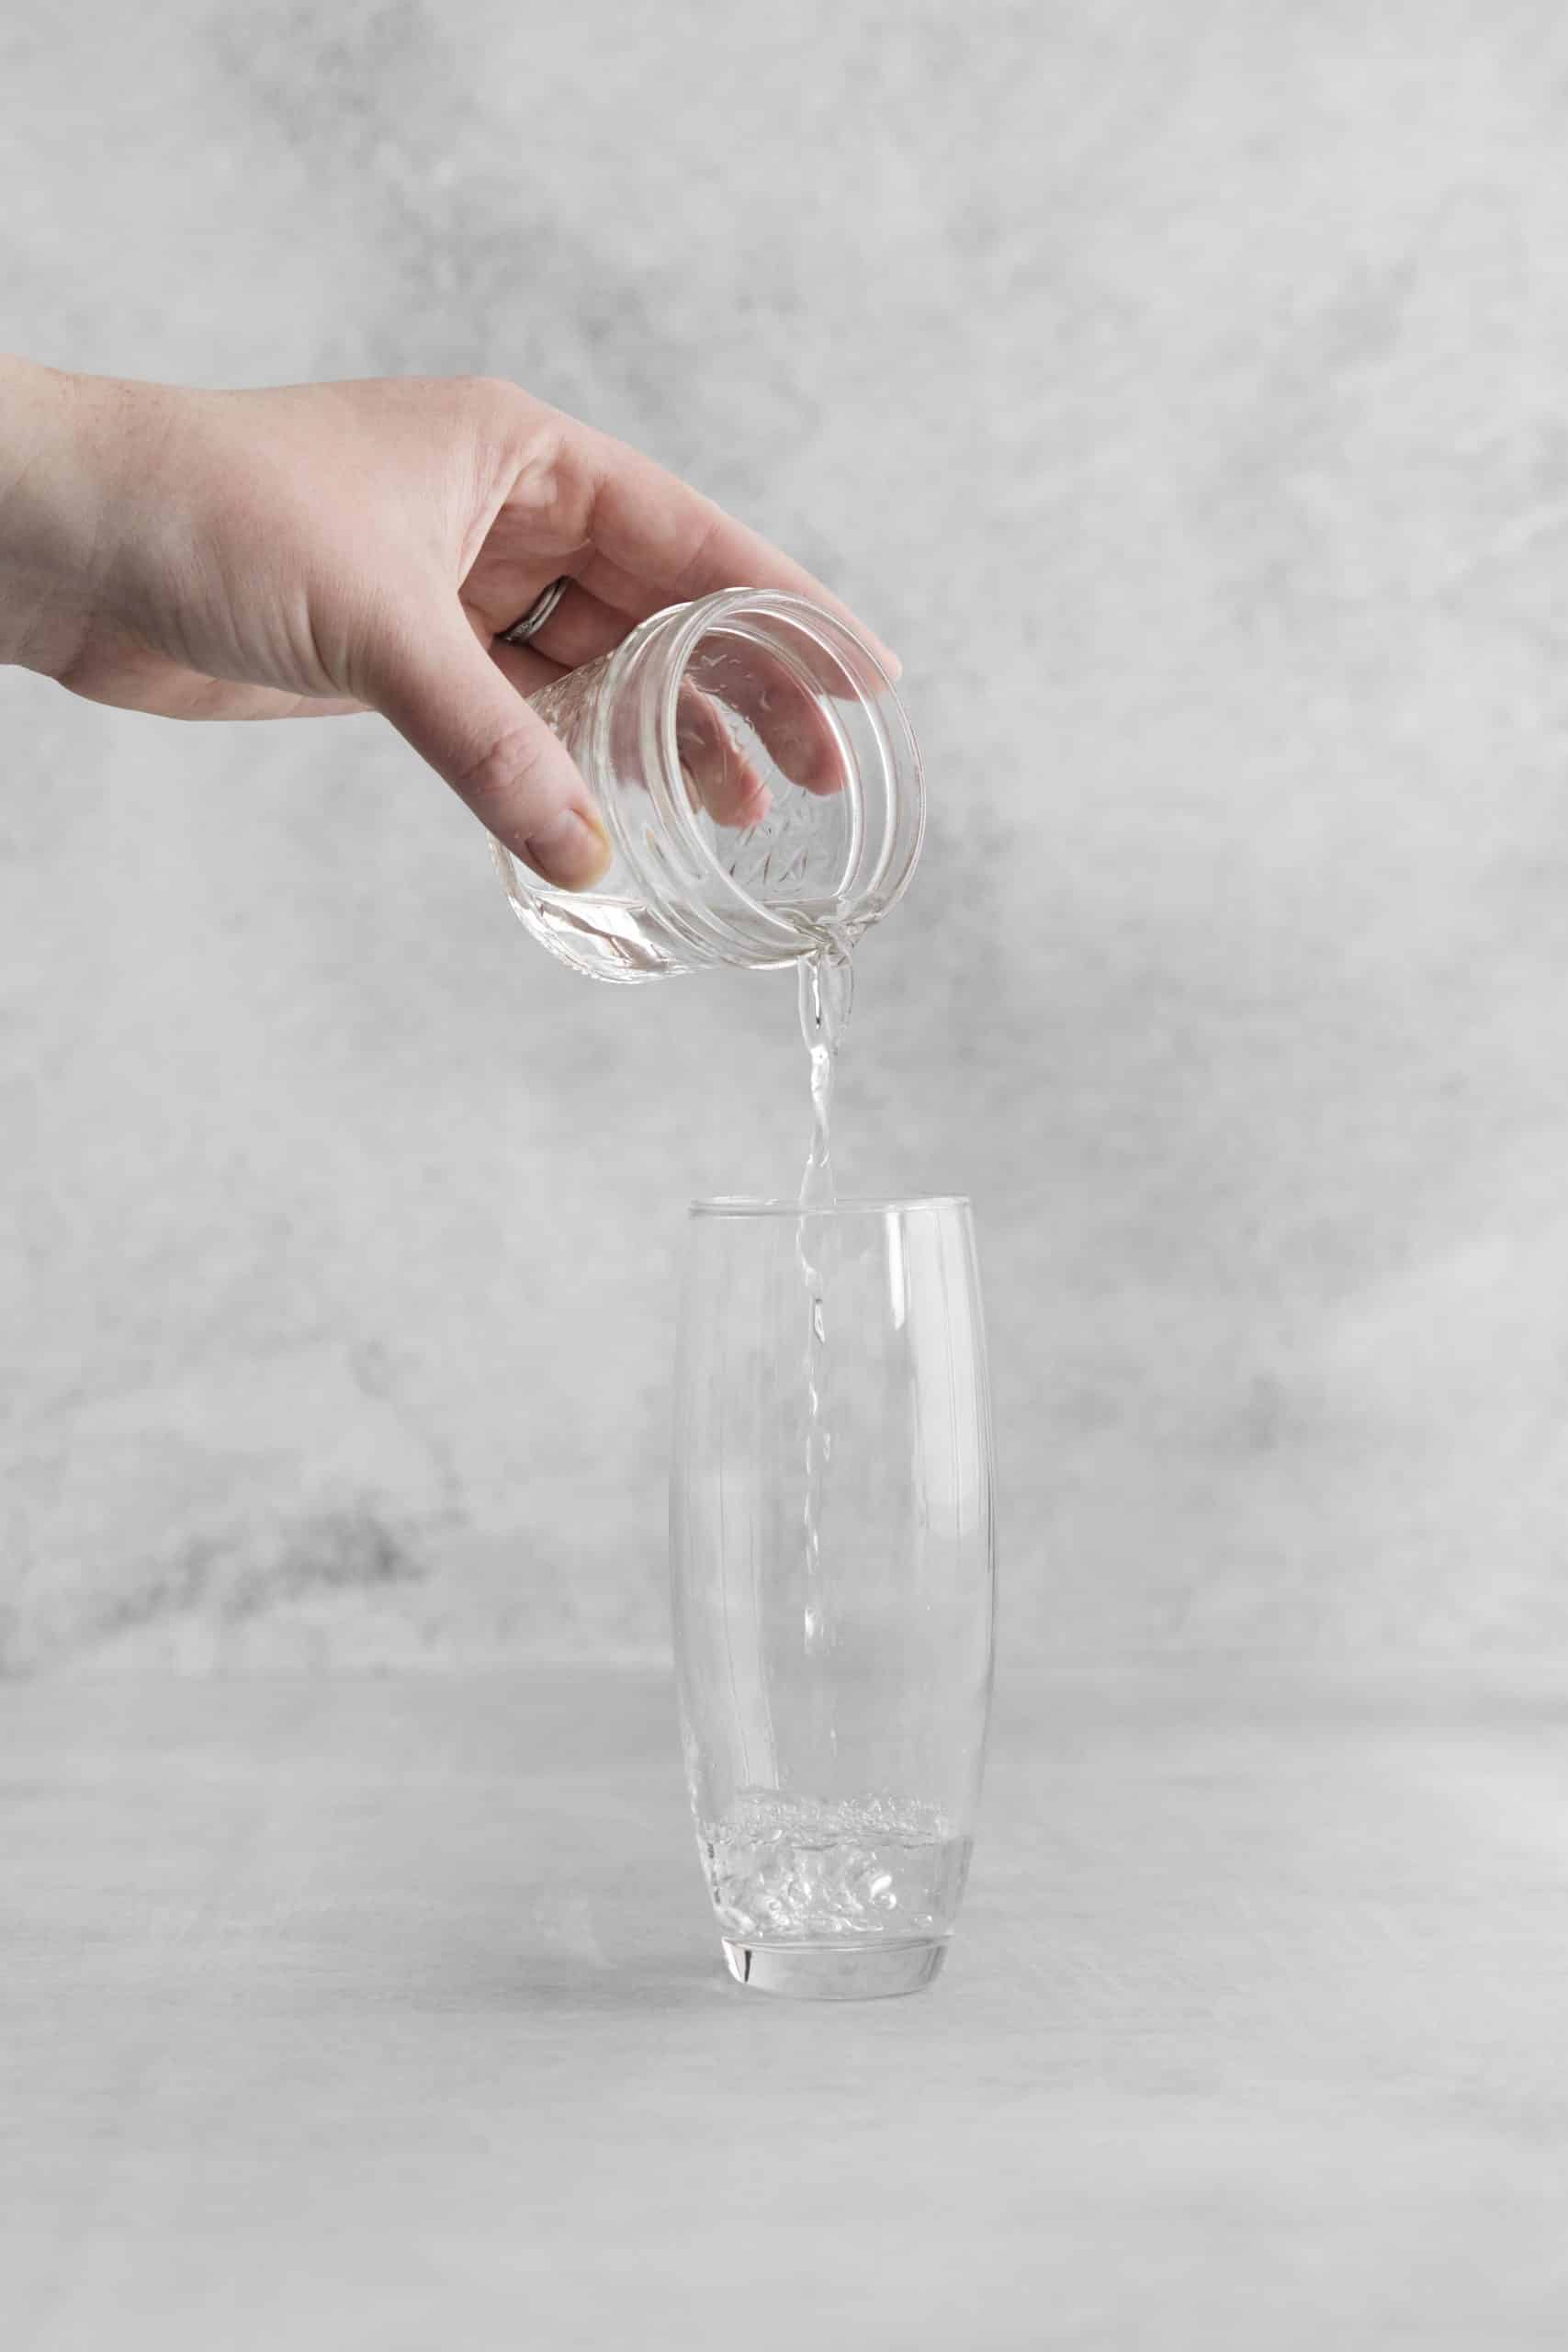 clear liquid being poured into a clear tall glass